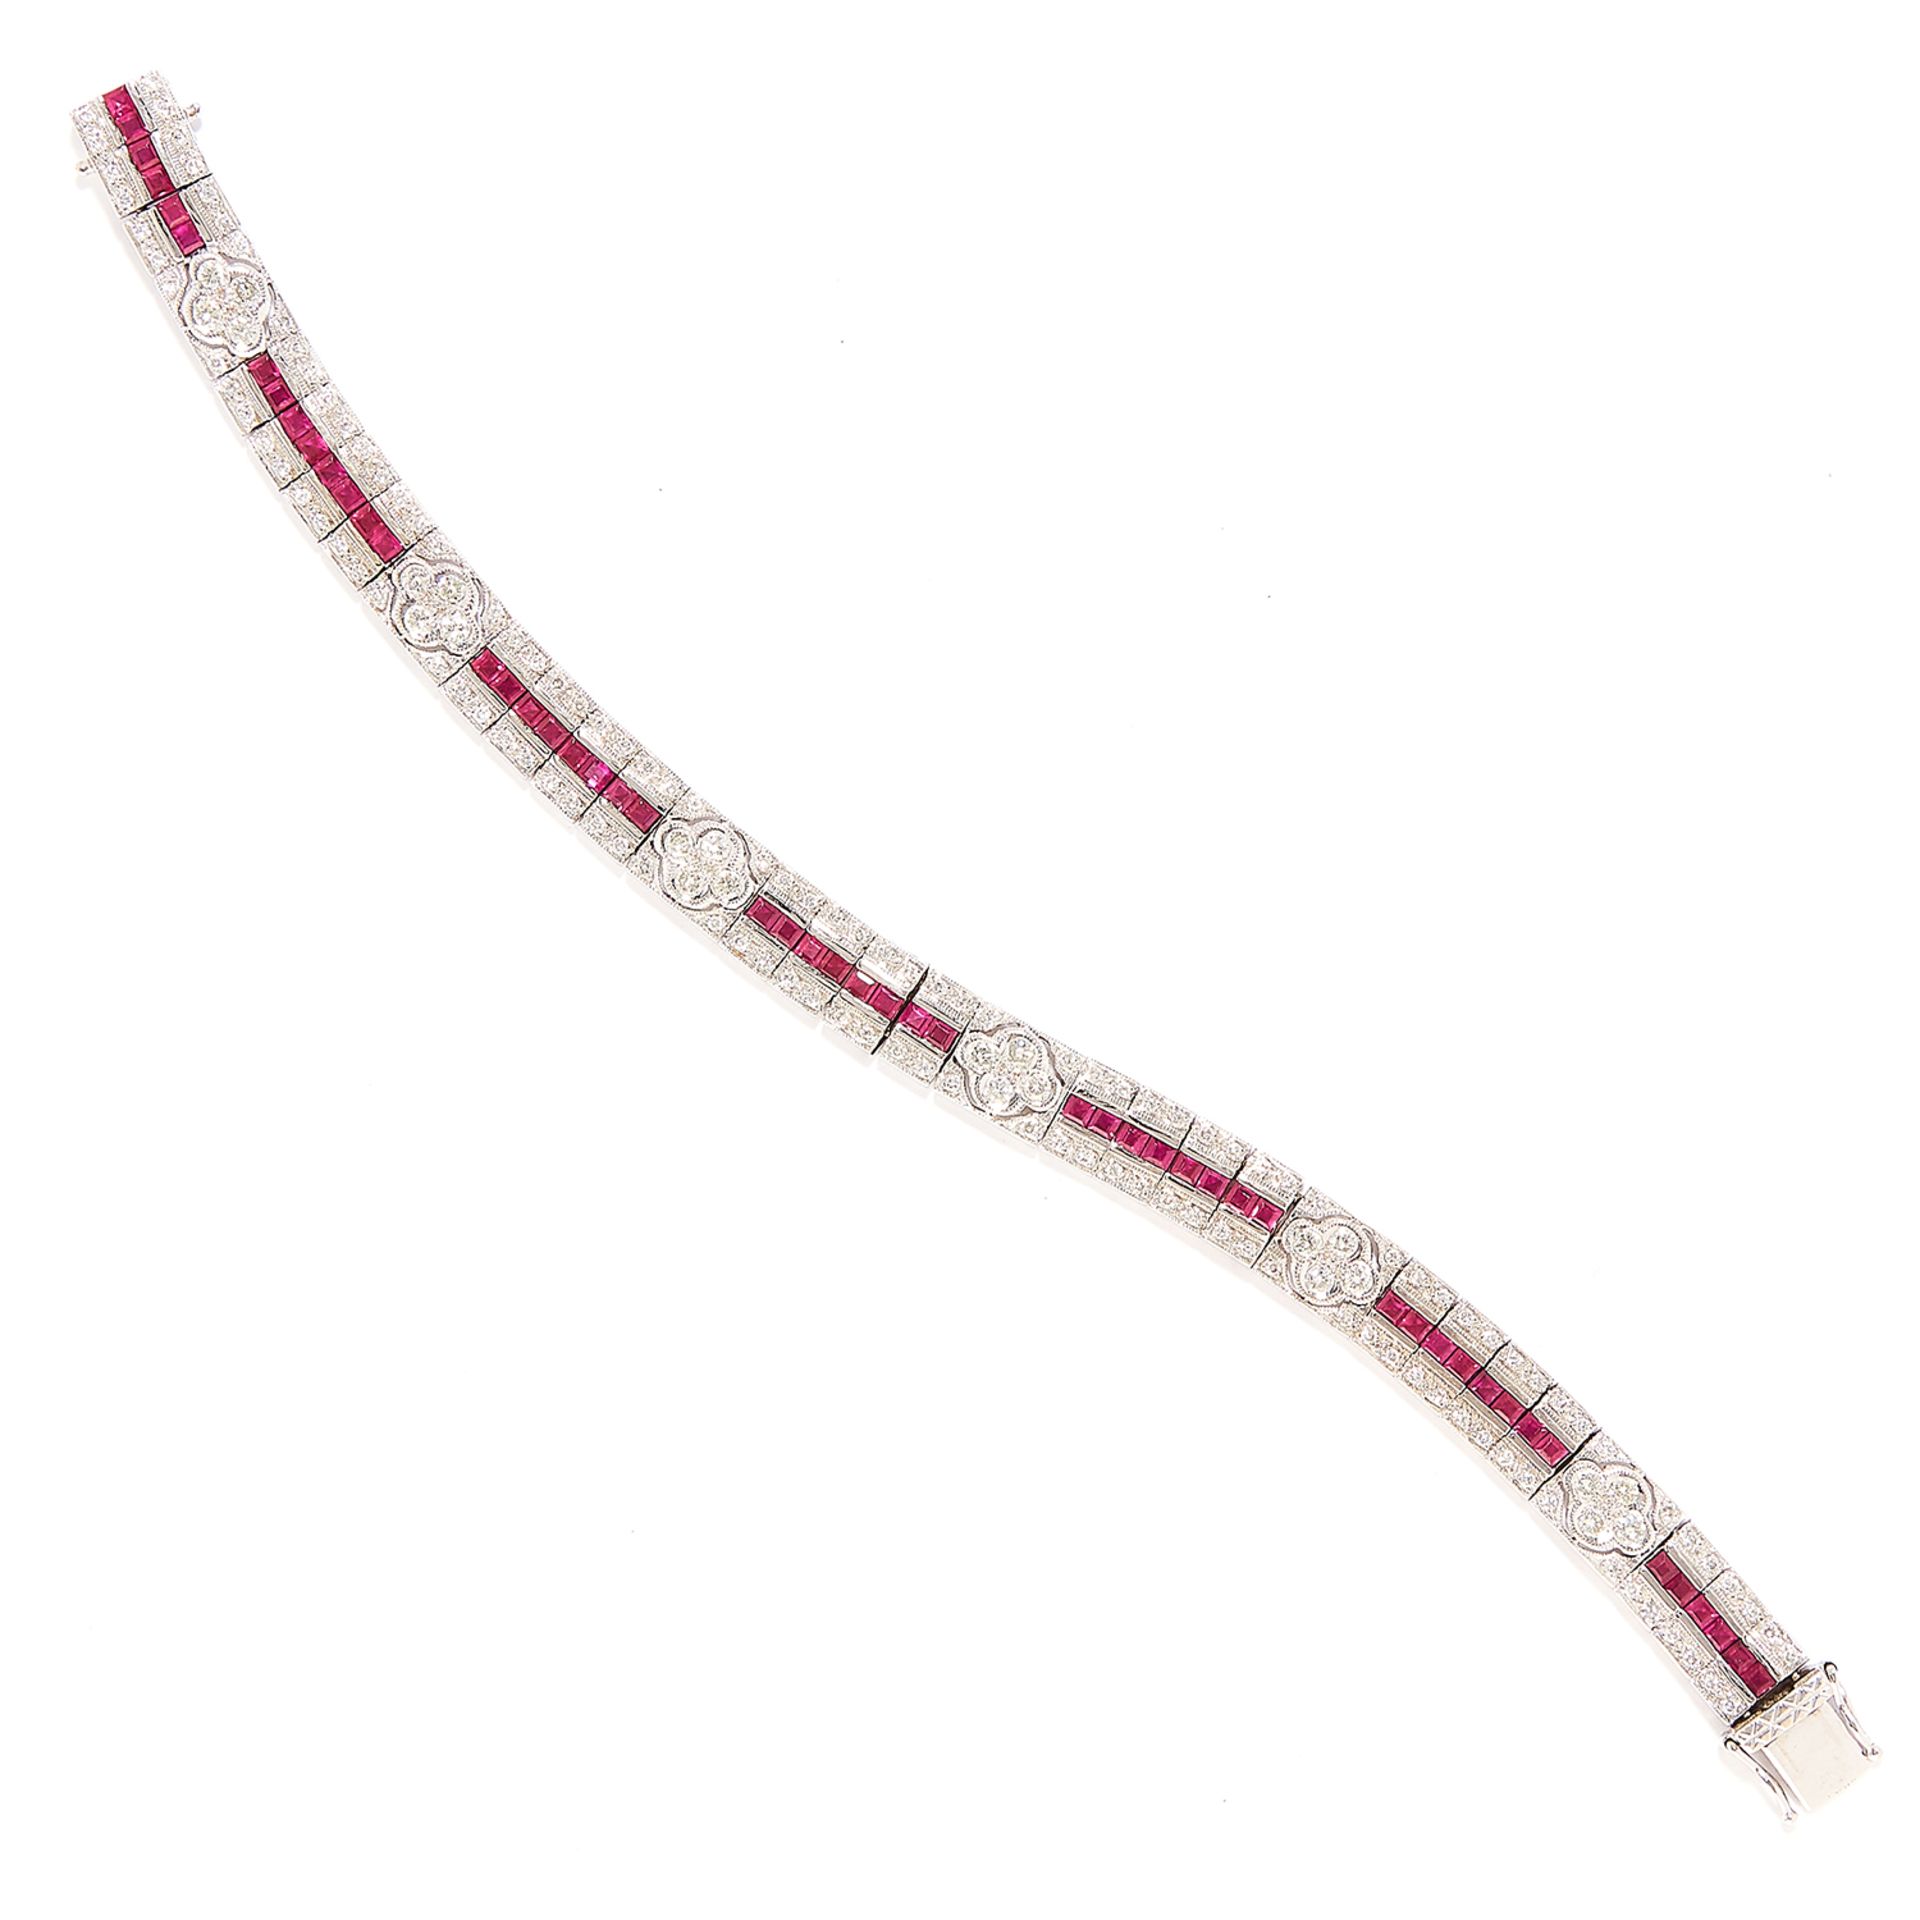 RUBY AND DIAMOND BRACELET in 18ct white gold, in Art Deco design set with step cut rubies